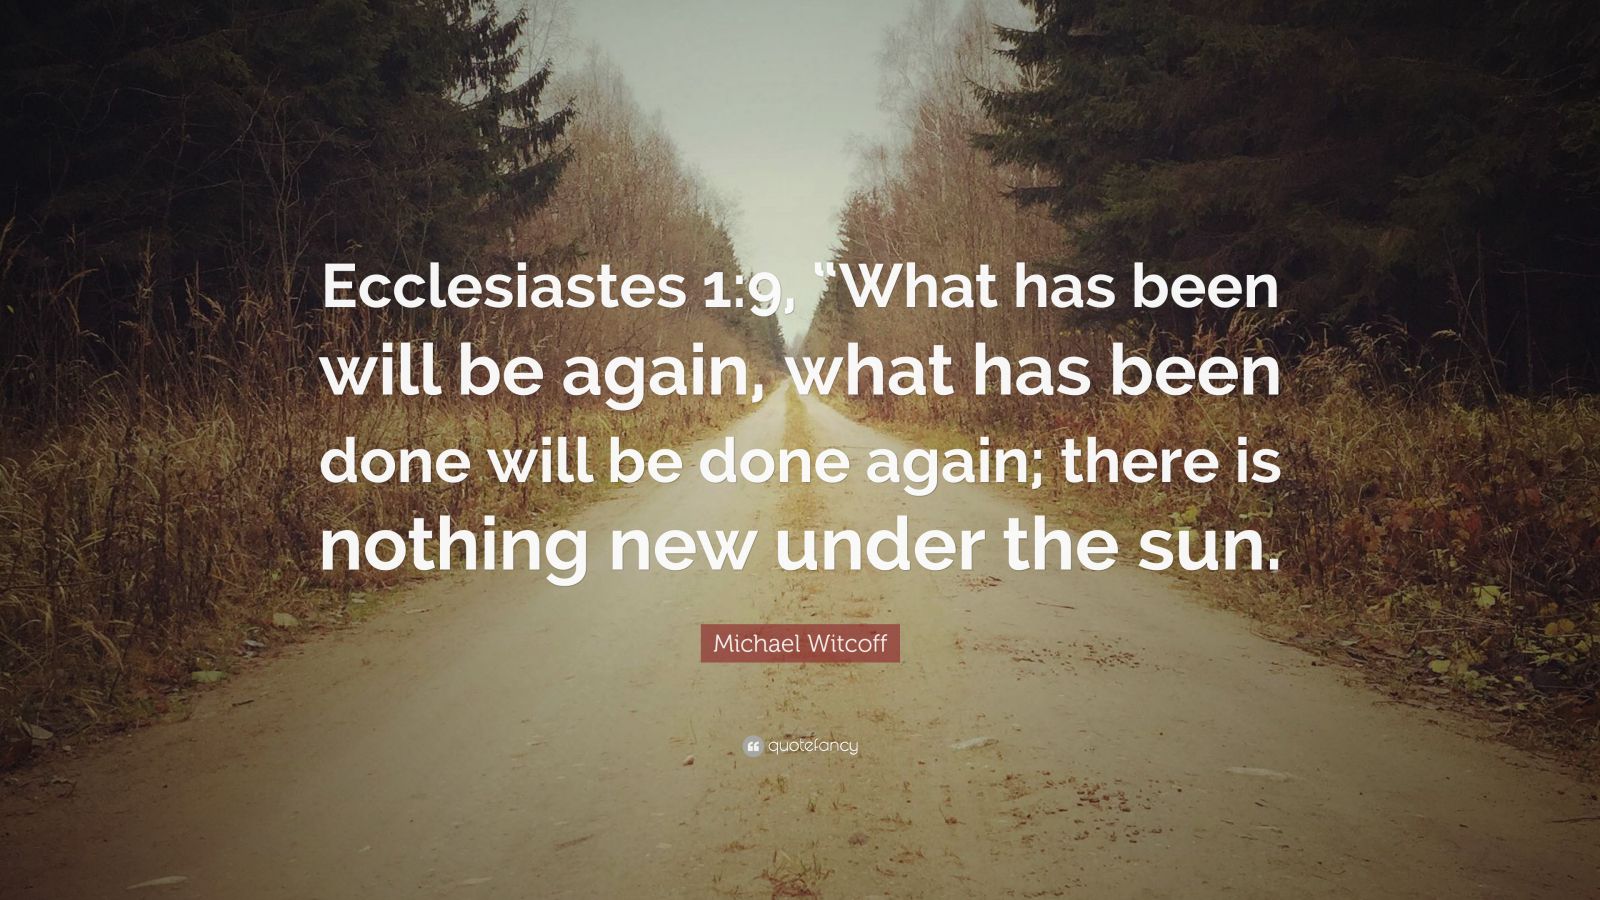 Michael Witcoff Quote: “Ecclesiastes 1:9, “What has been will be again ...